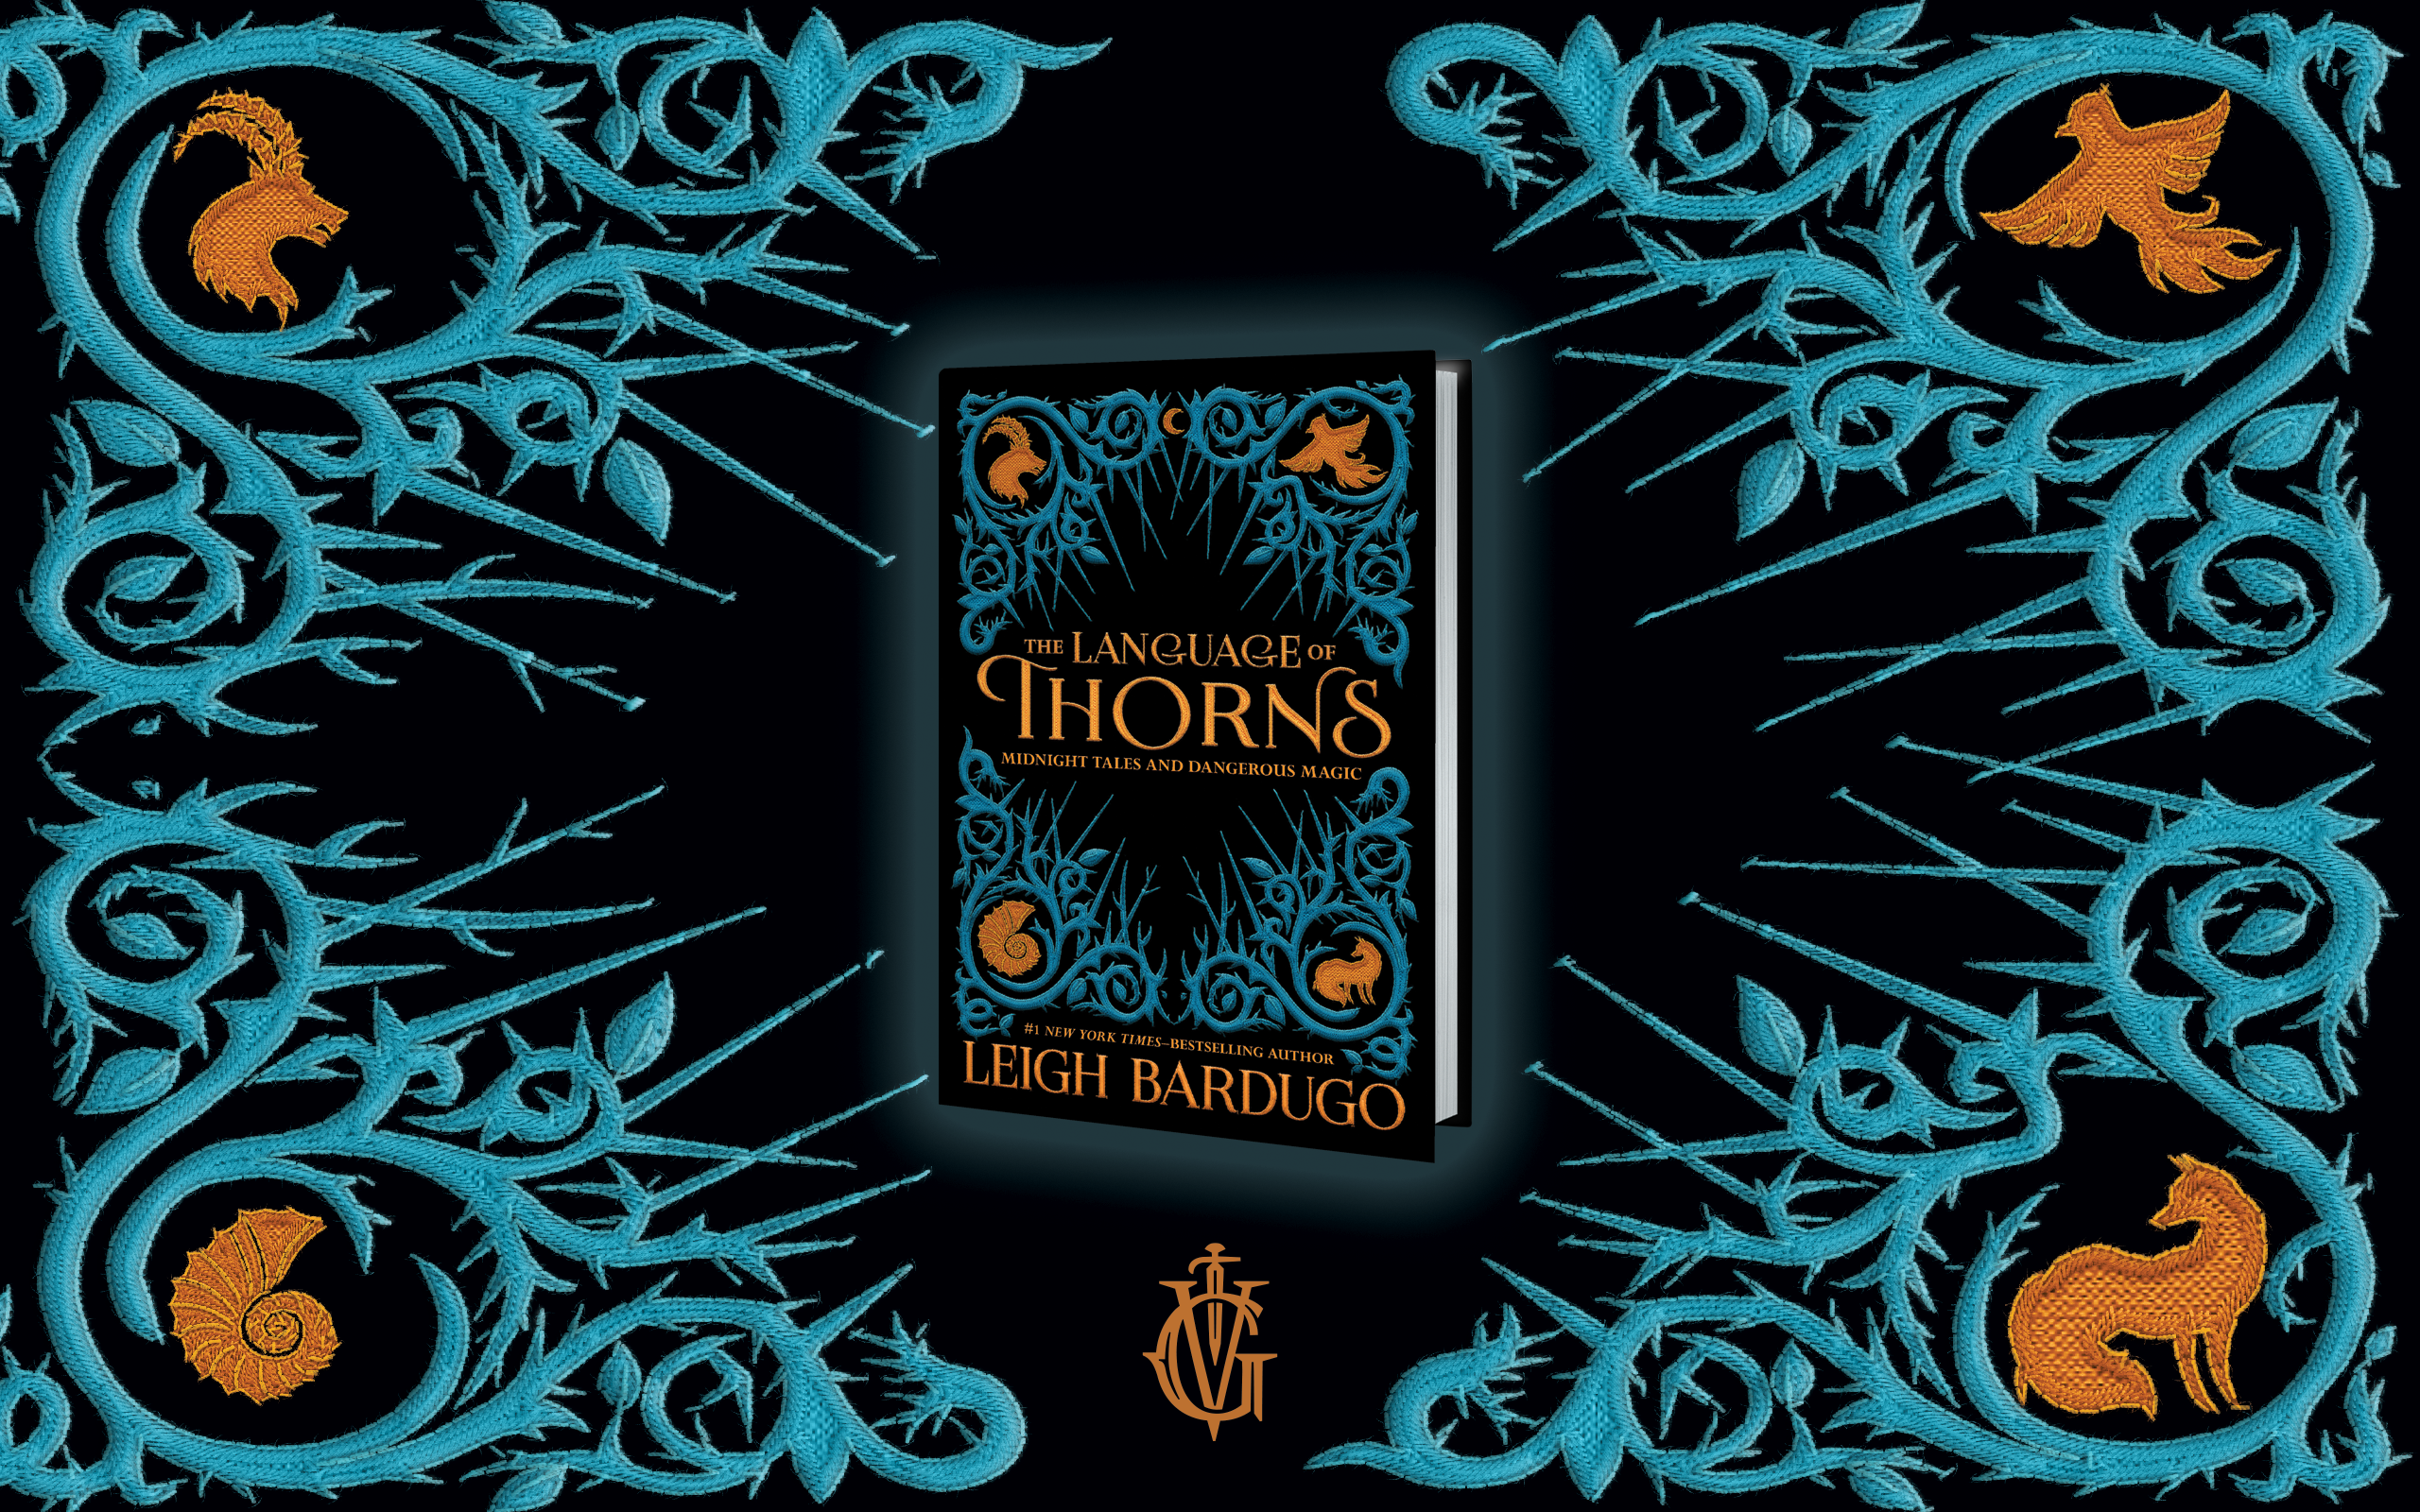 Decorative image featuring an ornate book cover titled "the language of thorns" by leigh bardugo, surrounded by intricate blue and gold floral patterns and mythical creatures on a black background.